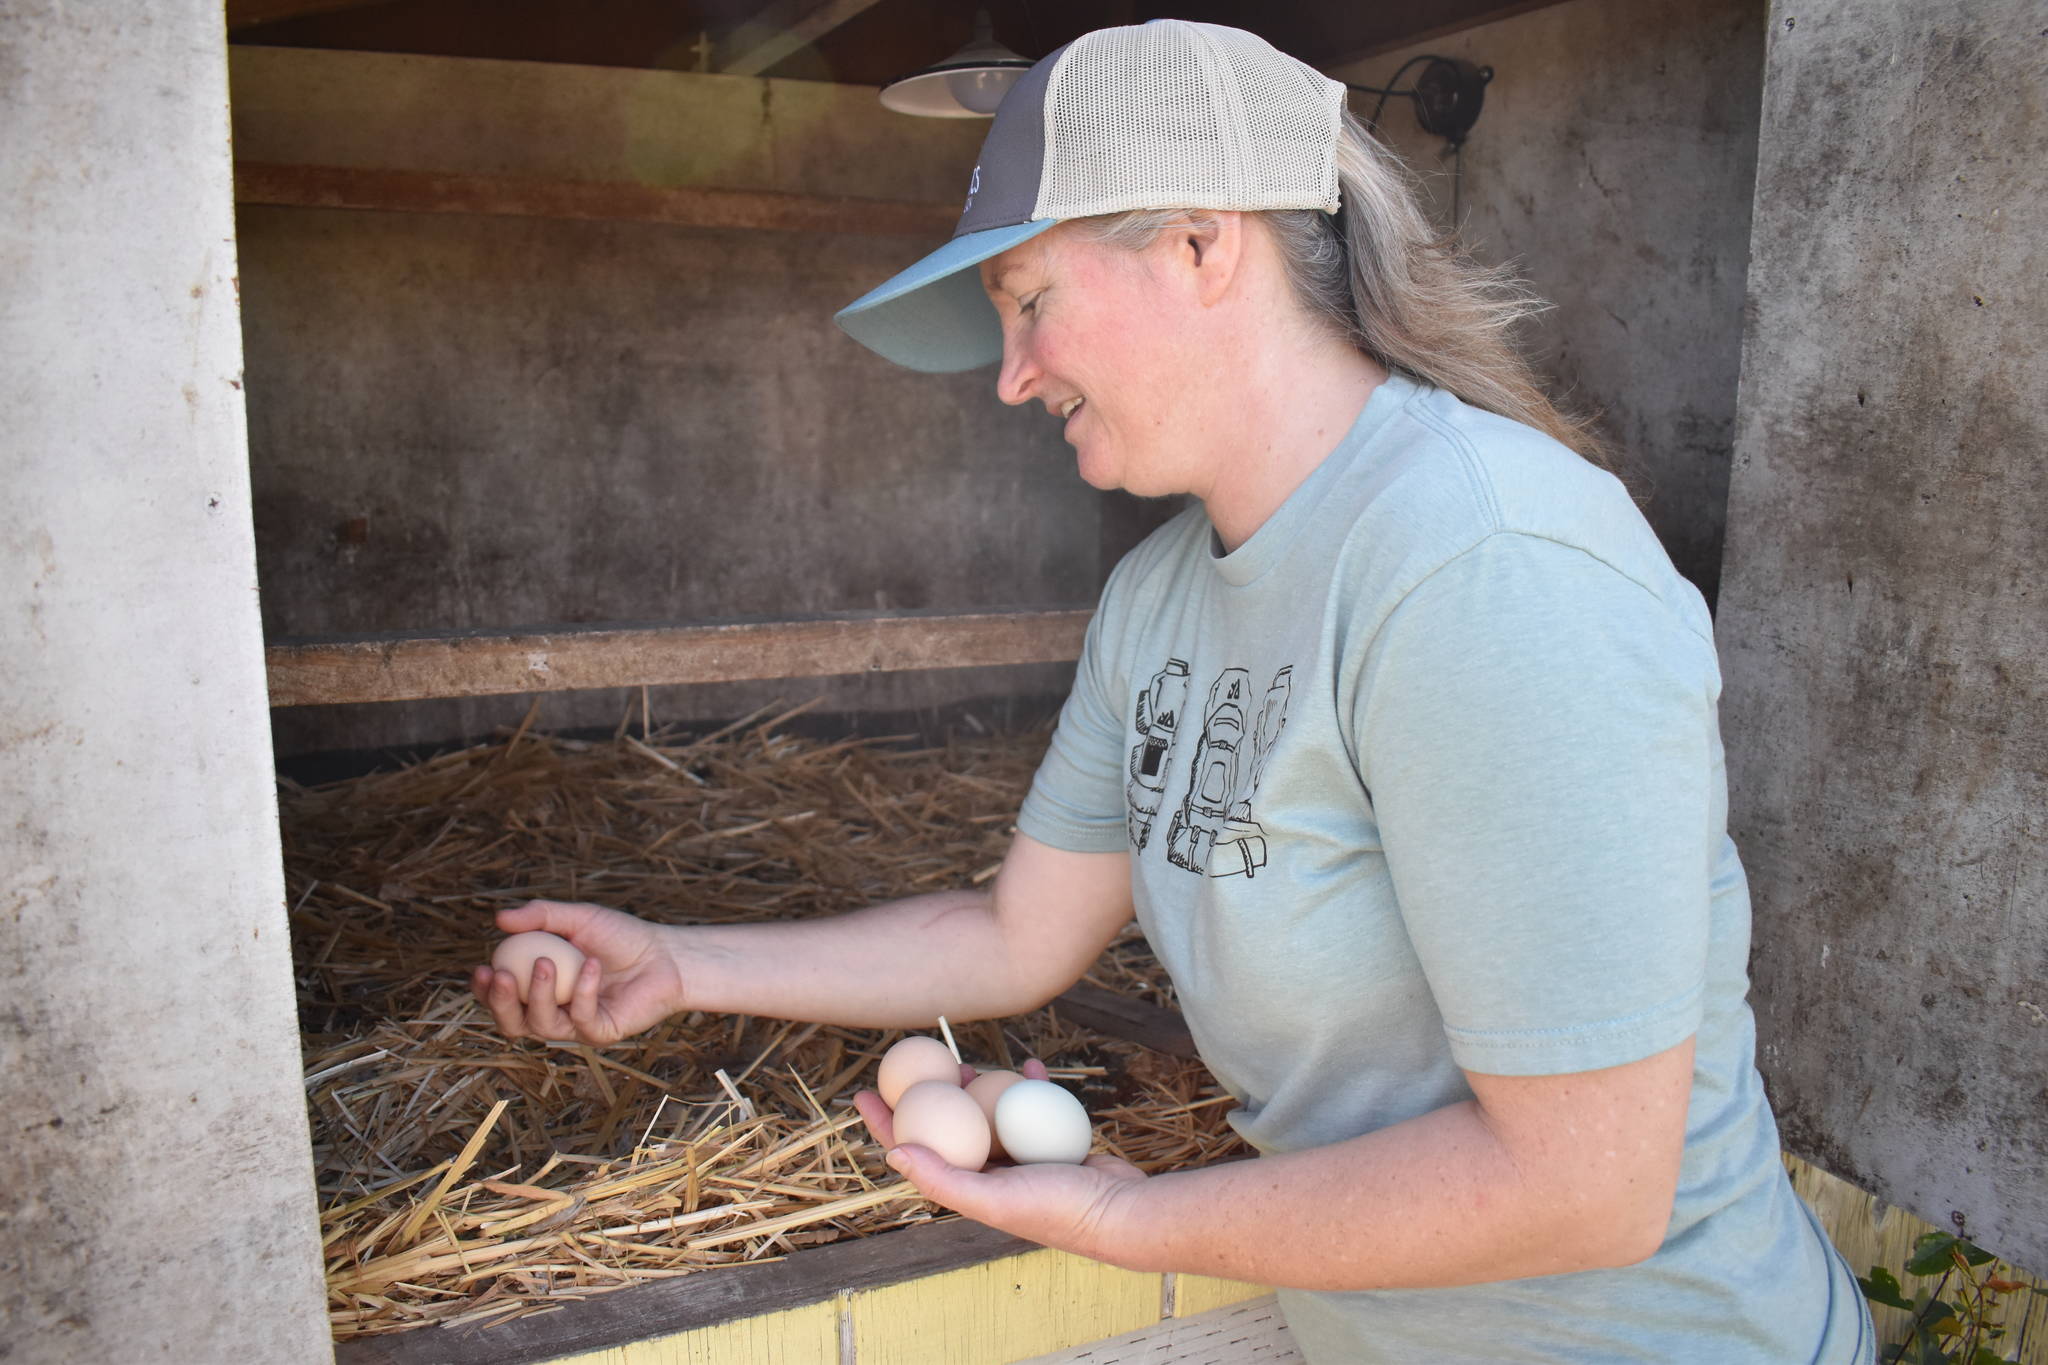 Melissa Stewart gathers some eggs at One Willow Farm in Oak Harbor. She and her husband, Mark, opened the farm last year after going through the “Armed to Farm” program for military veterans. Photo by Emily Gilbert/Whidbey News-Times